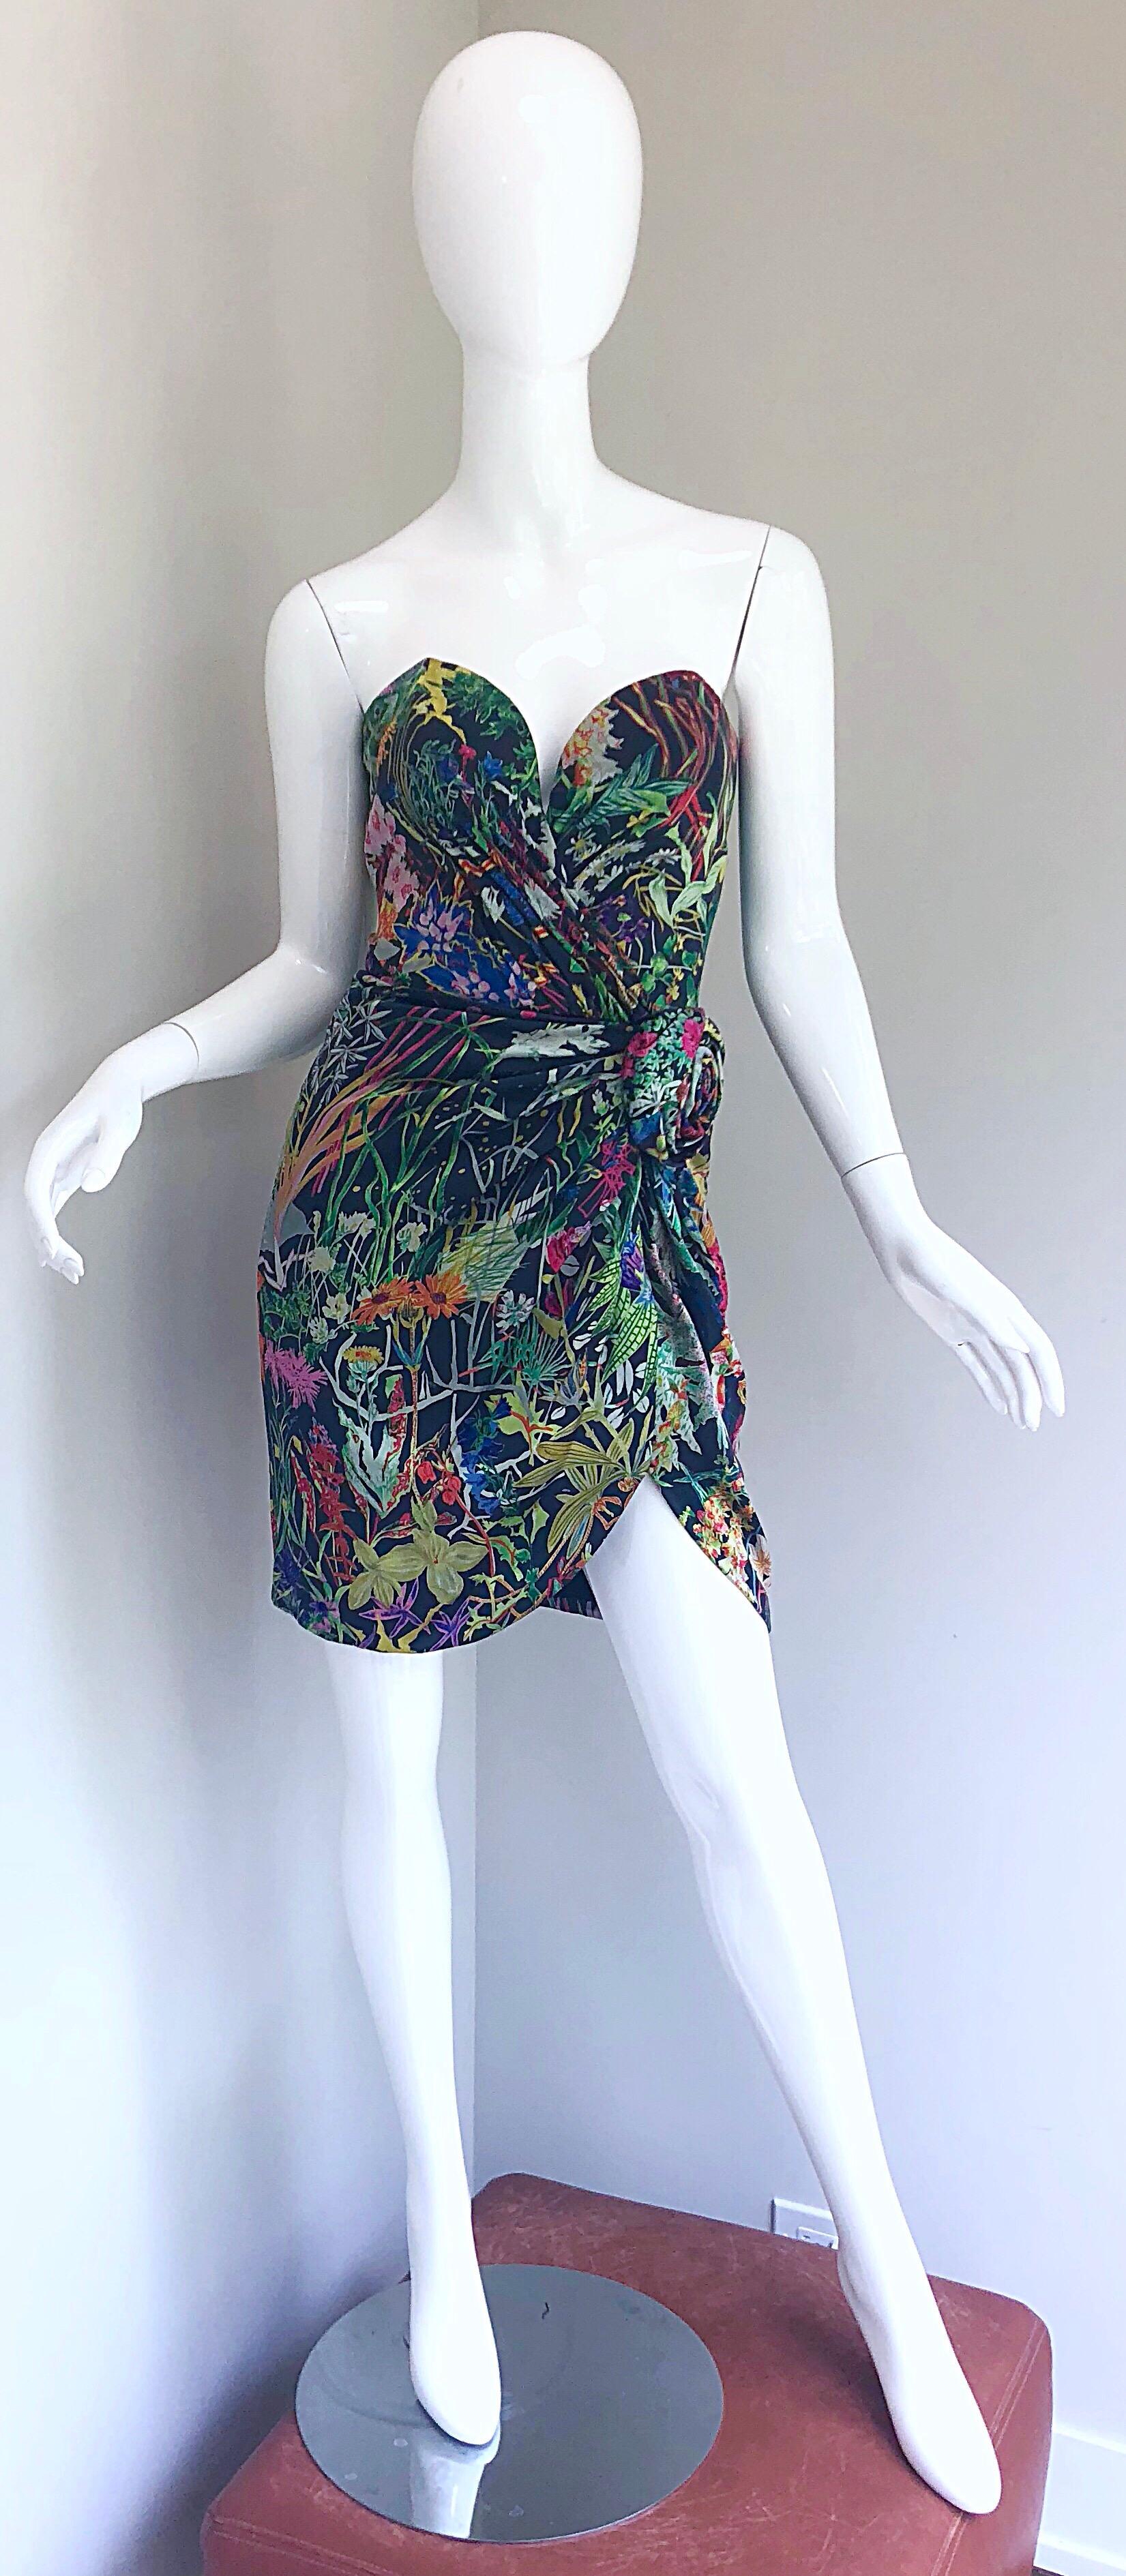 Fabulous vintage 1980s VICKY TIEL COUTURE botanical print silk strapless dress! Features amazing prints in practically every color of the rainbow; vibrant colors of green, fuchsia, purple, pink, blue, orange, red, etc. Amazing construction, with so